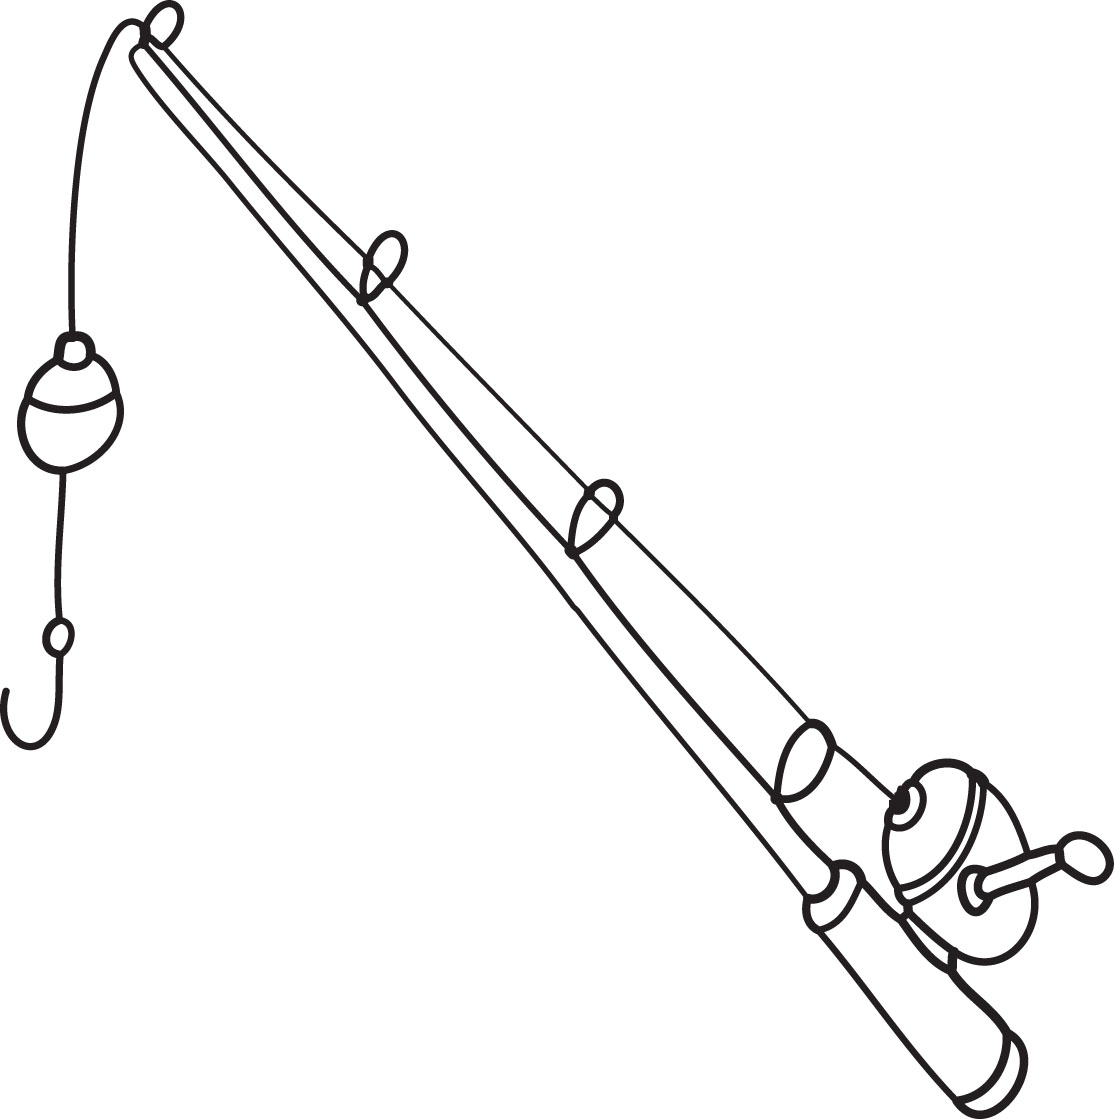 Fishing Rod Clipart - ClipArt Best